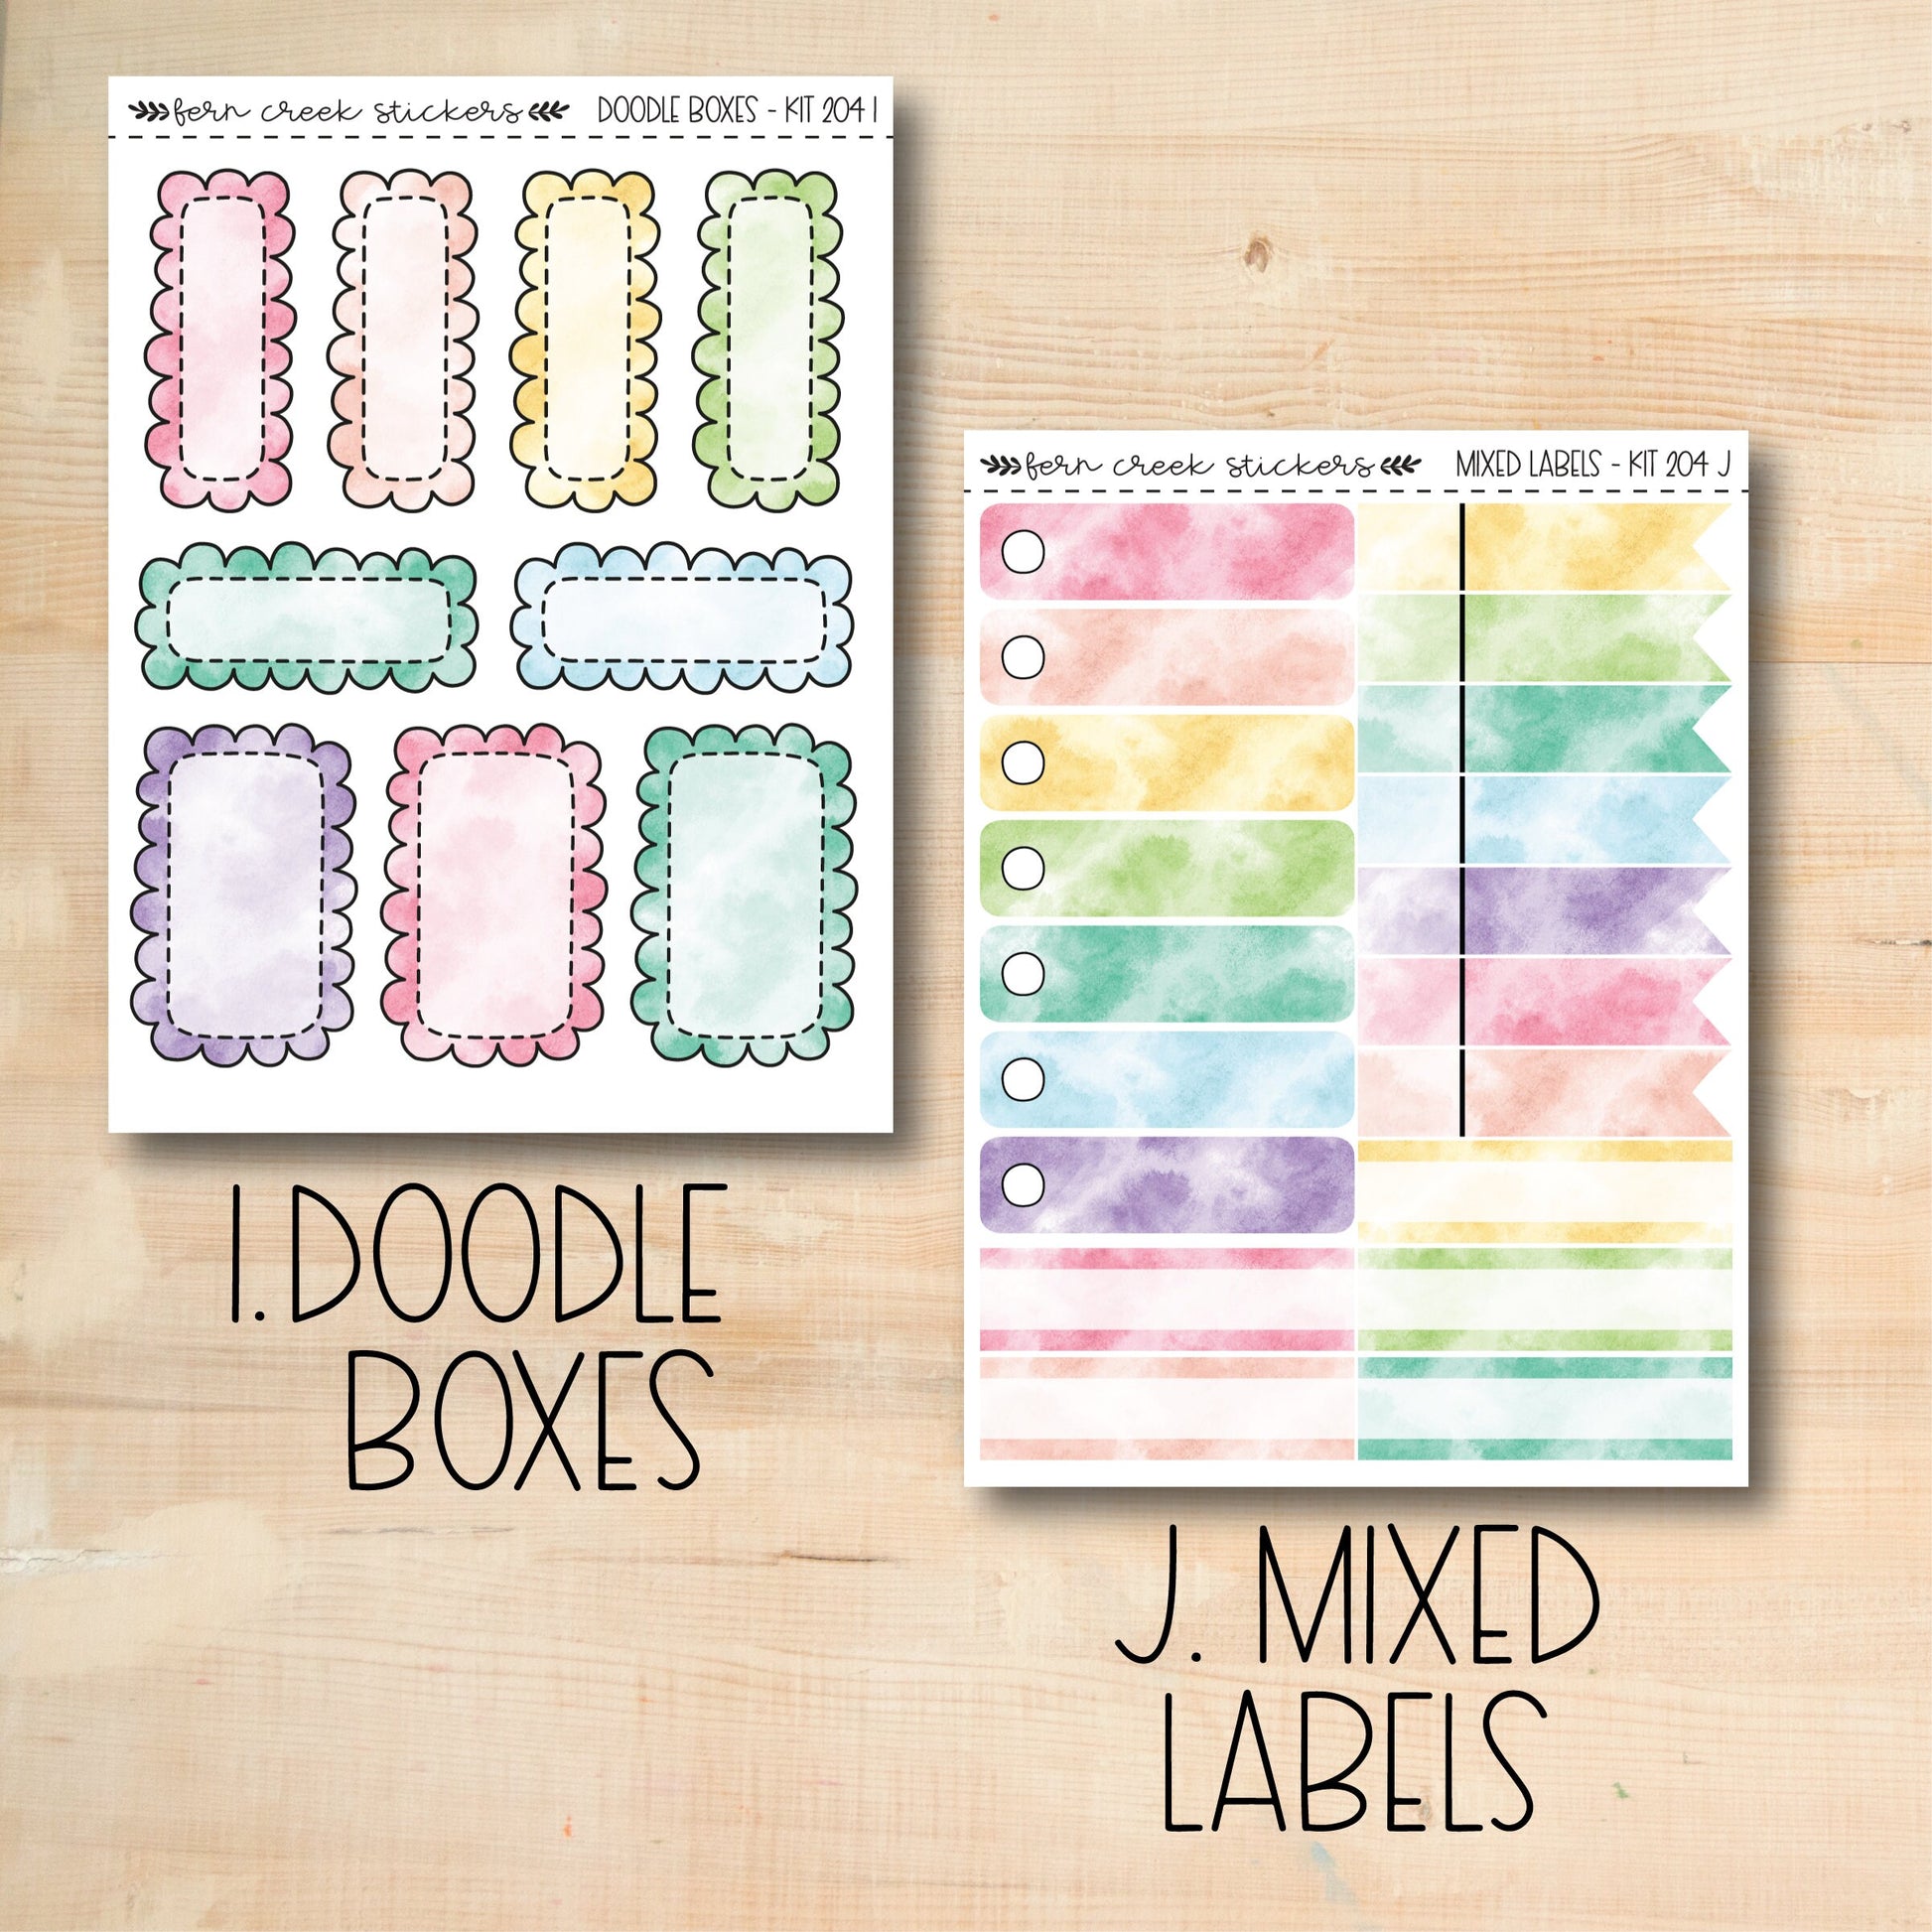 a printable planner sticker with the words doodle boxes on it